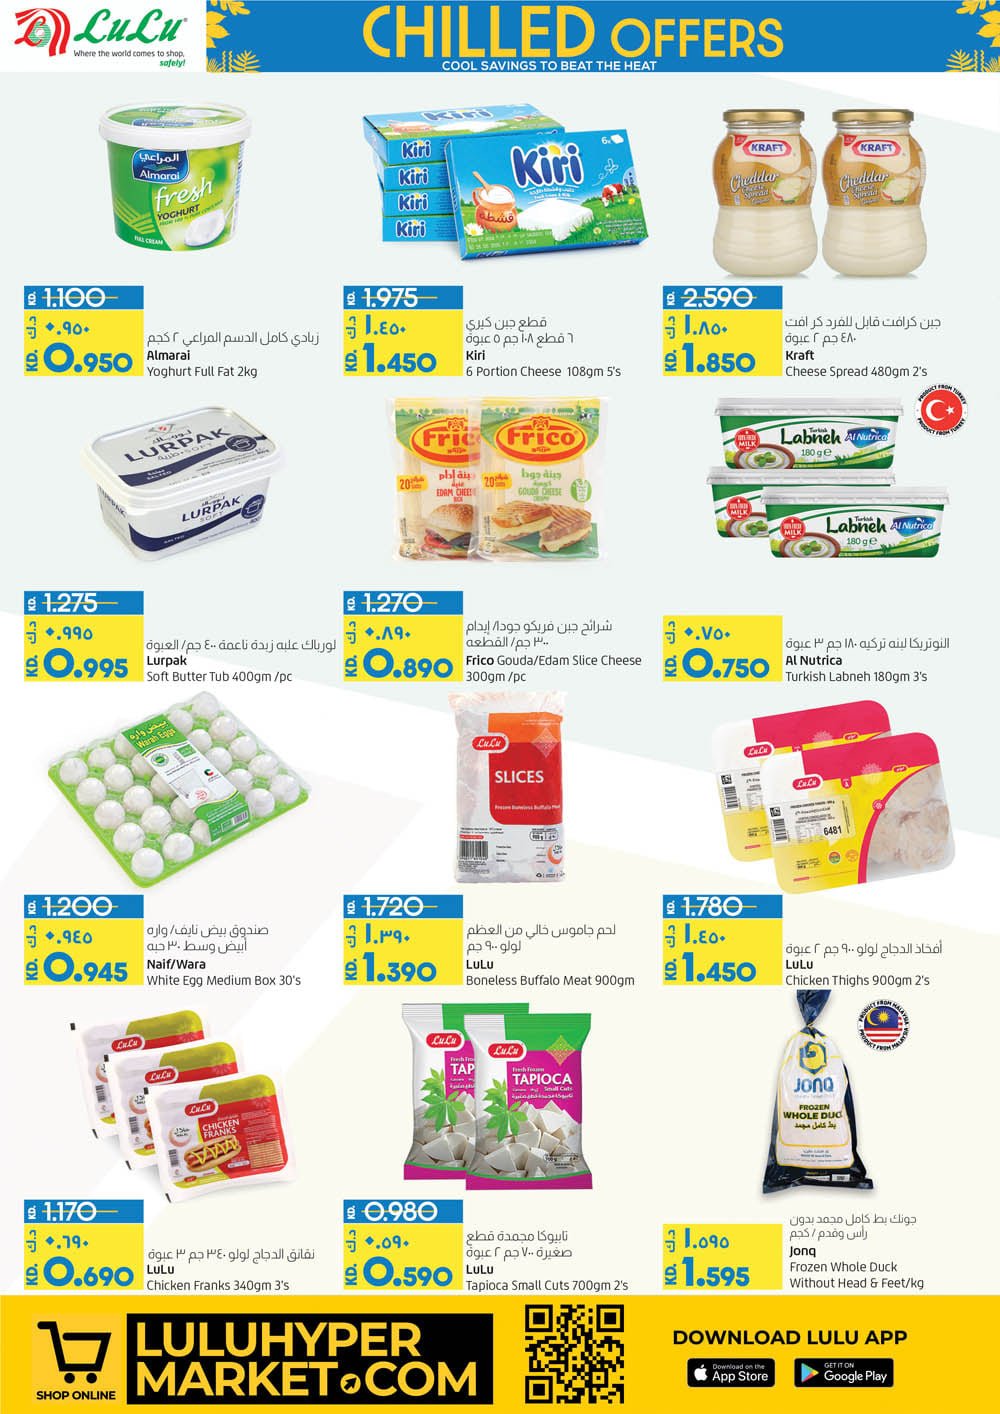 Lulu Hypermarket Chilled Offers, iiQ8 weekly promotions 2